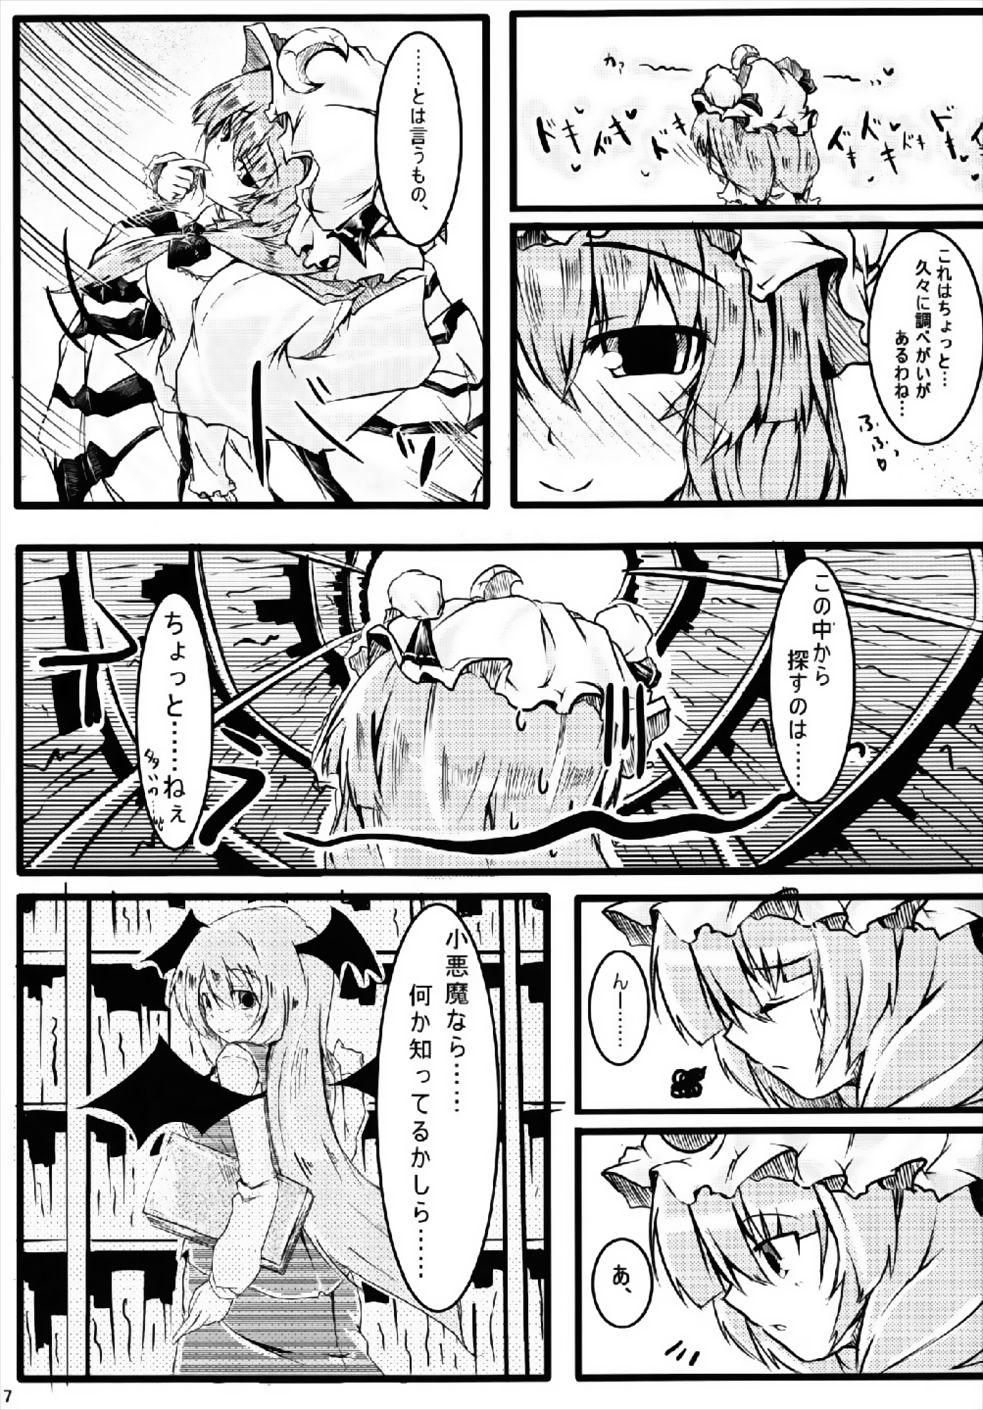 Retro RemiFlaPatche! - Touhou project Scene - Page 6